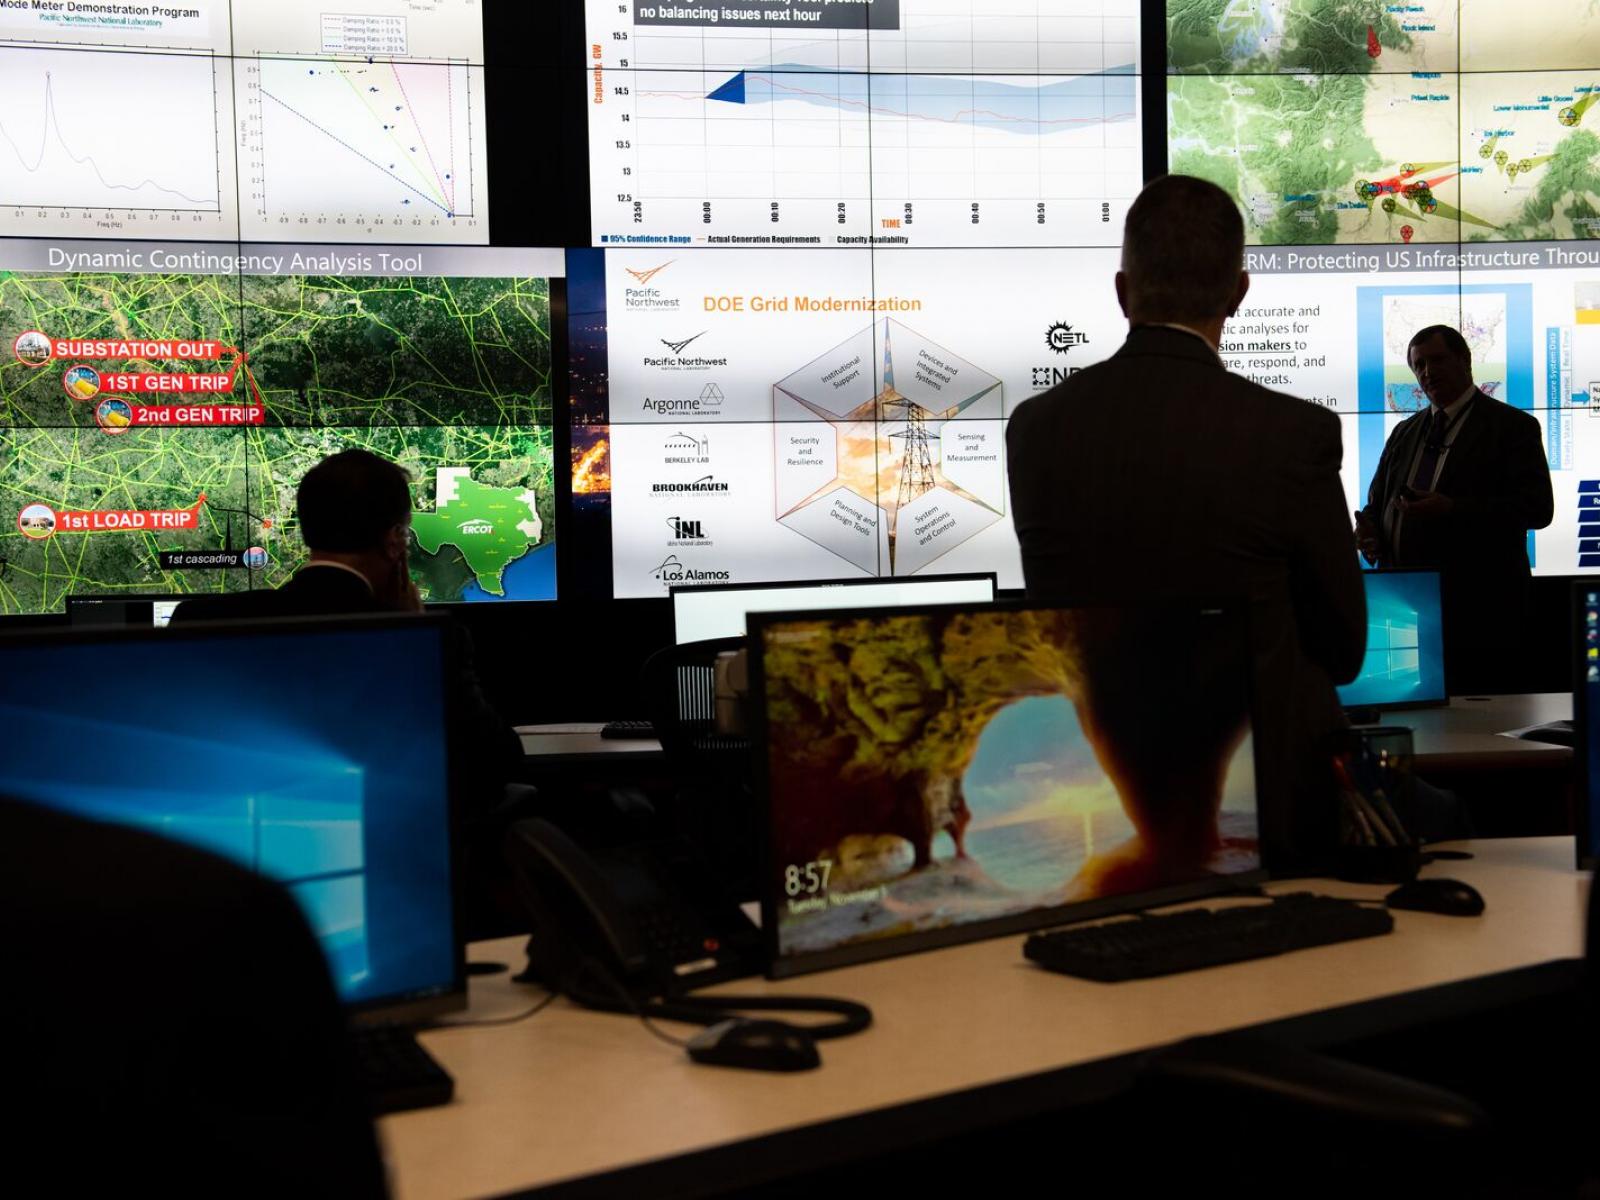 Researchers discuss the power grid in an electrical control room